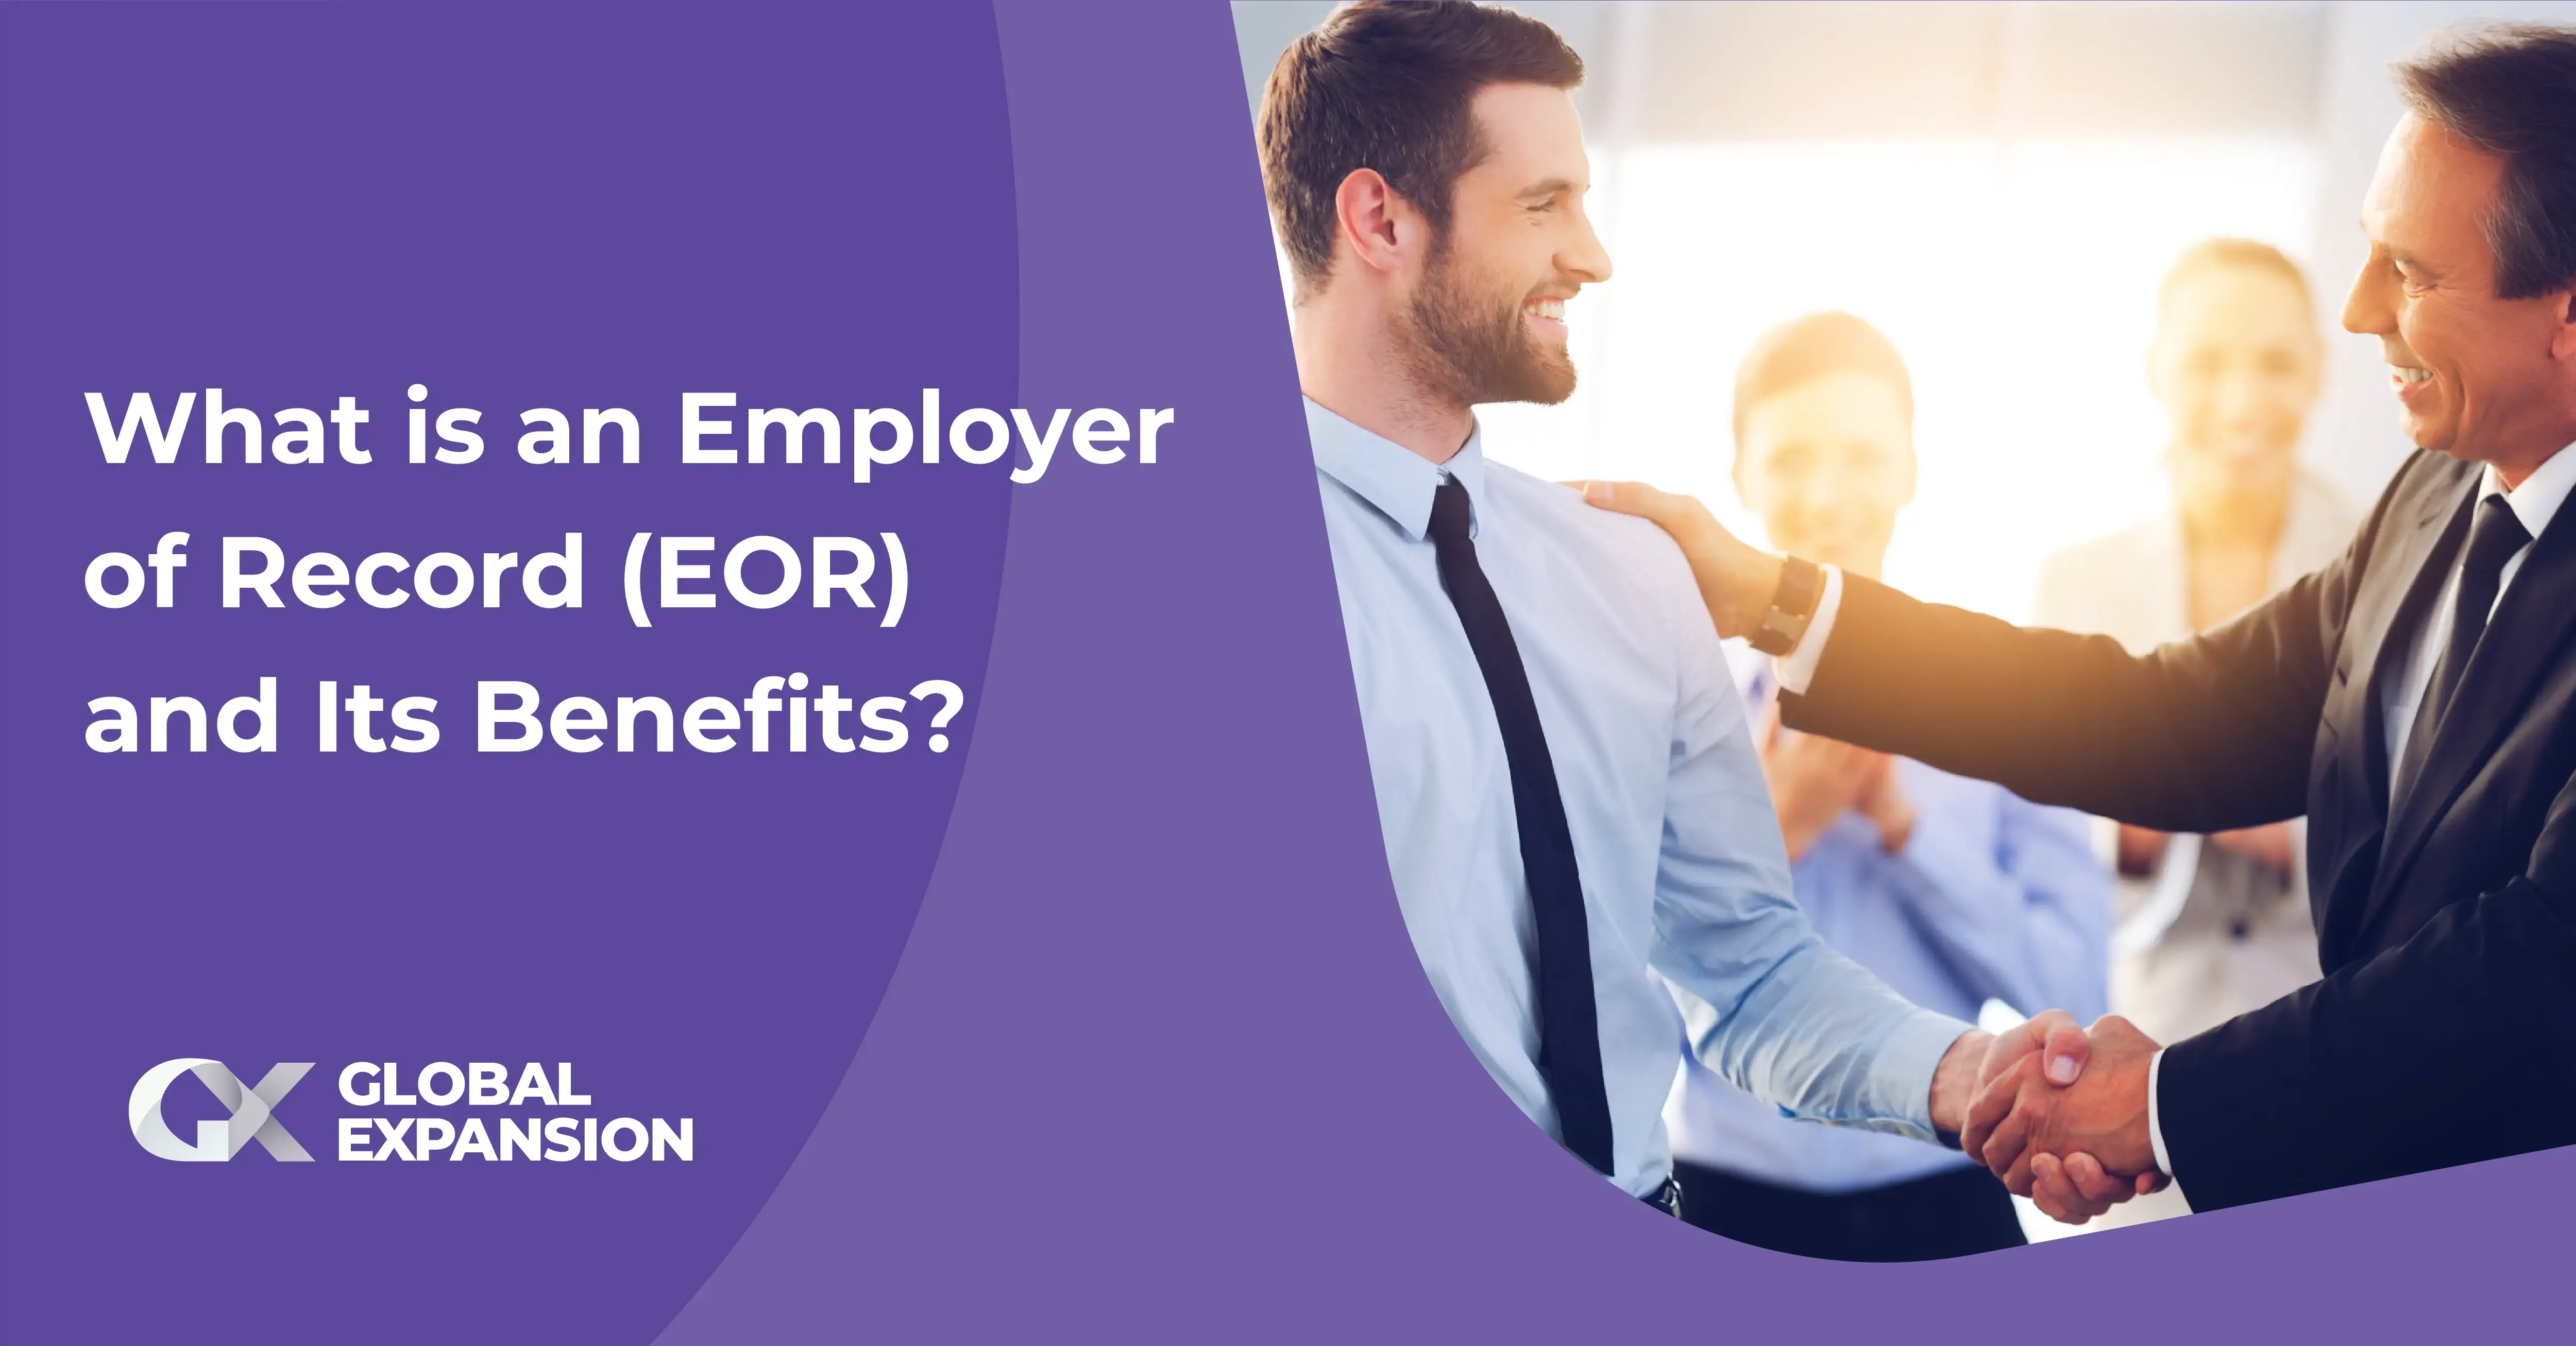 What is an Employer of Record (EOR) and Its Benefits?